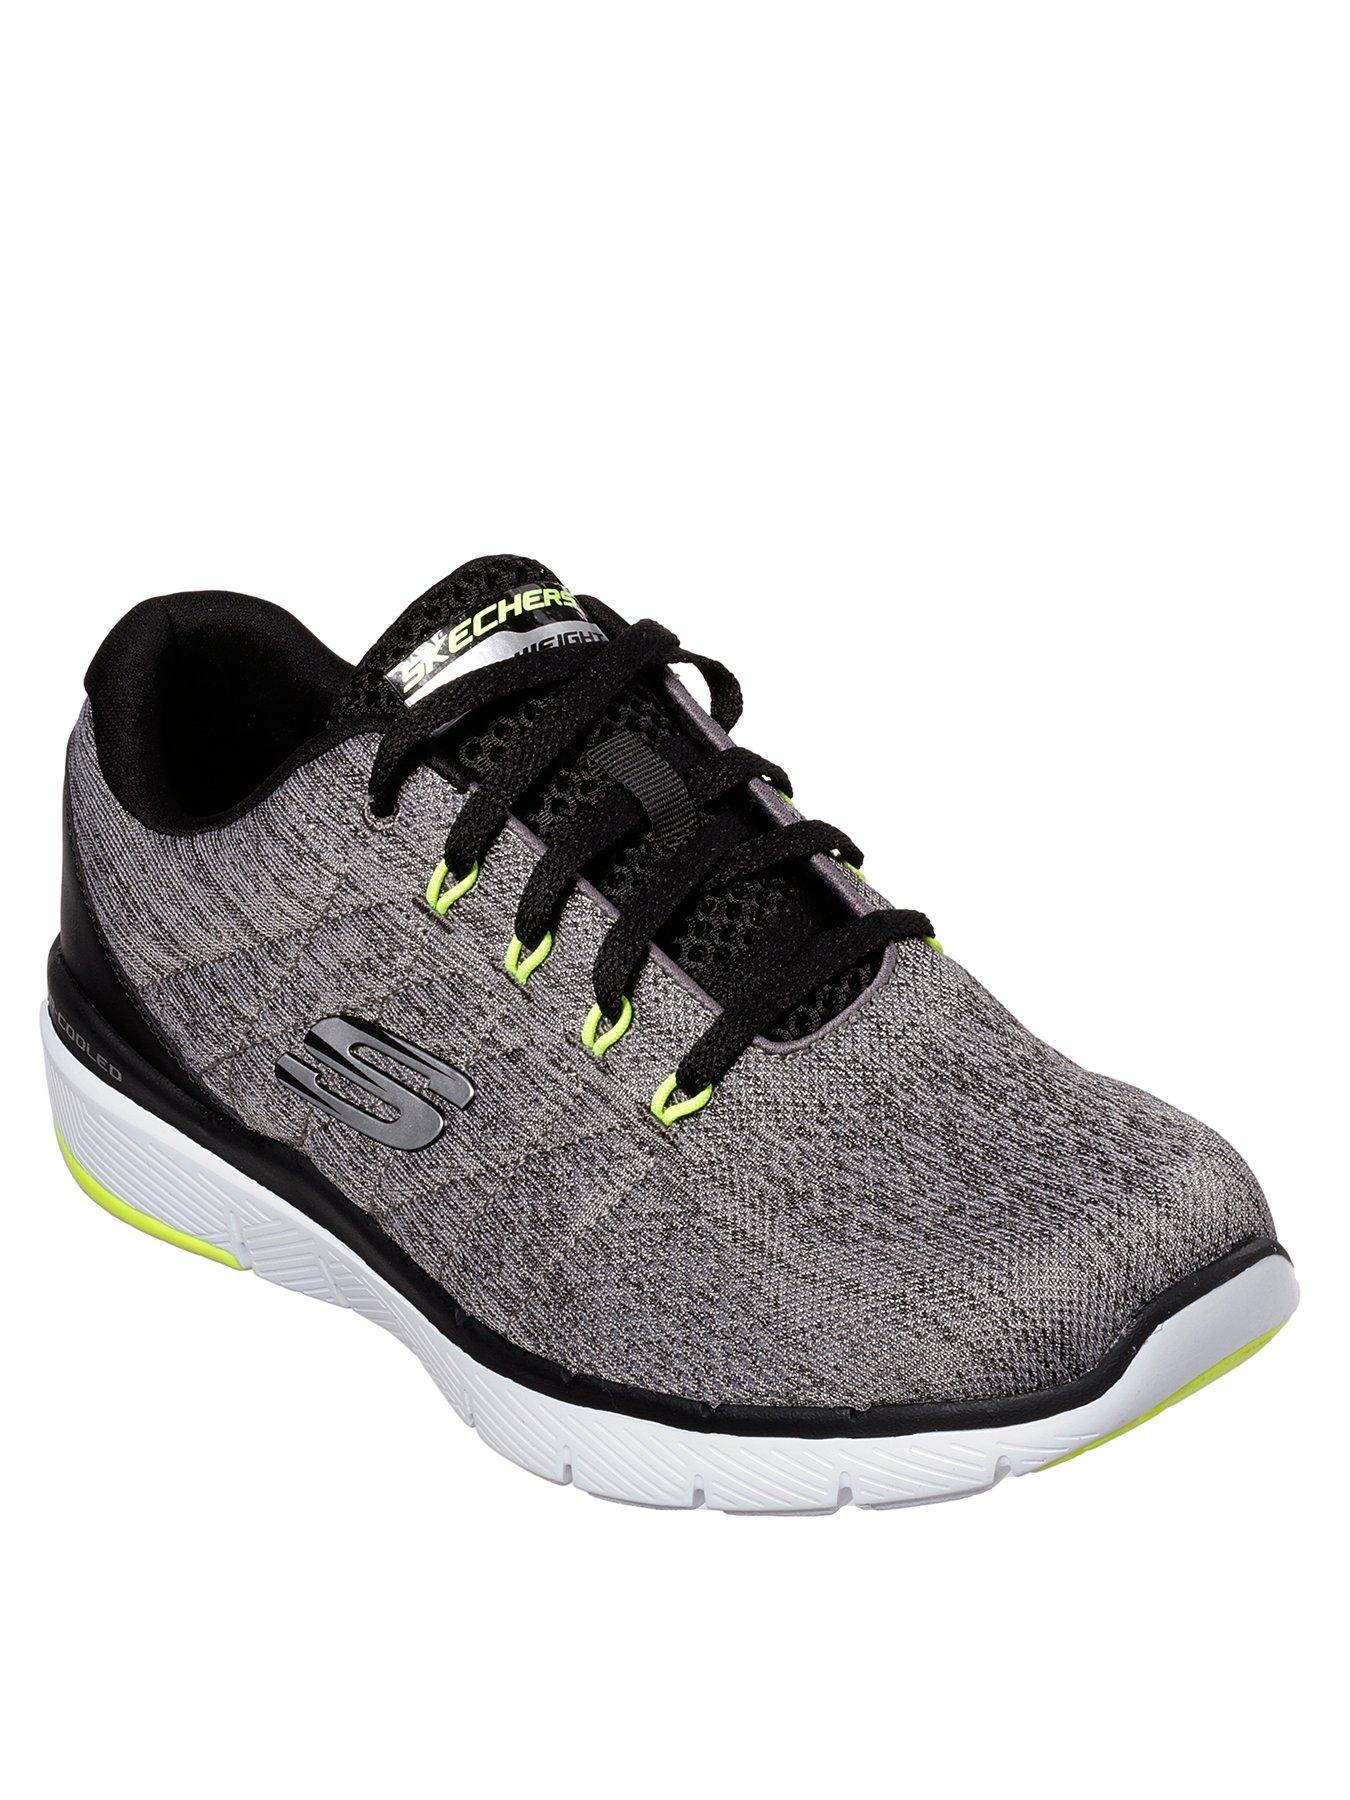 sketcher shoes with memory foam